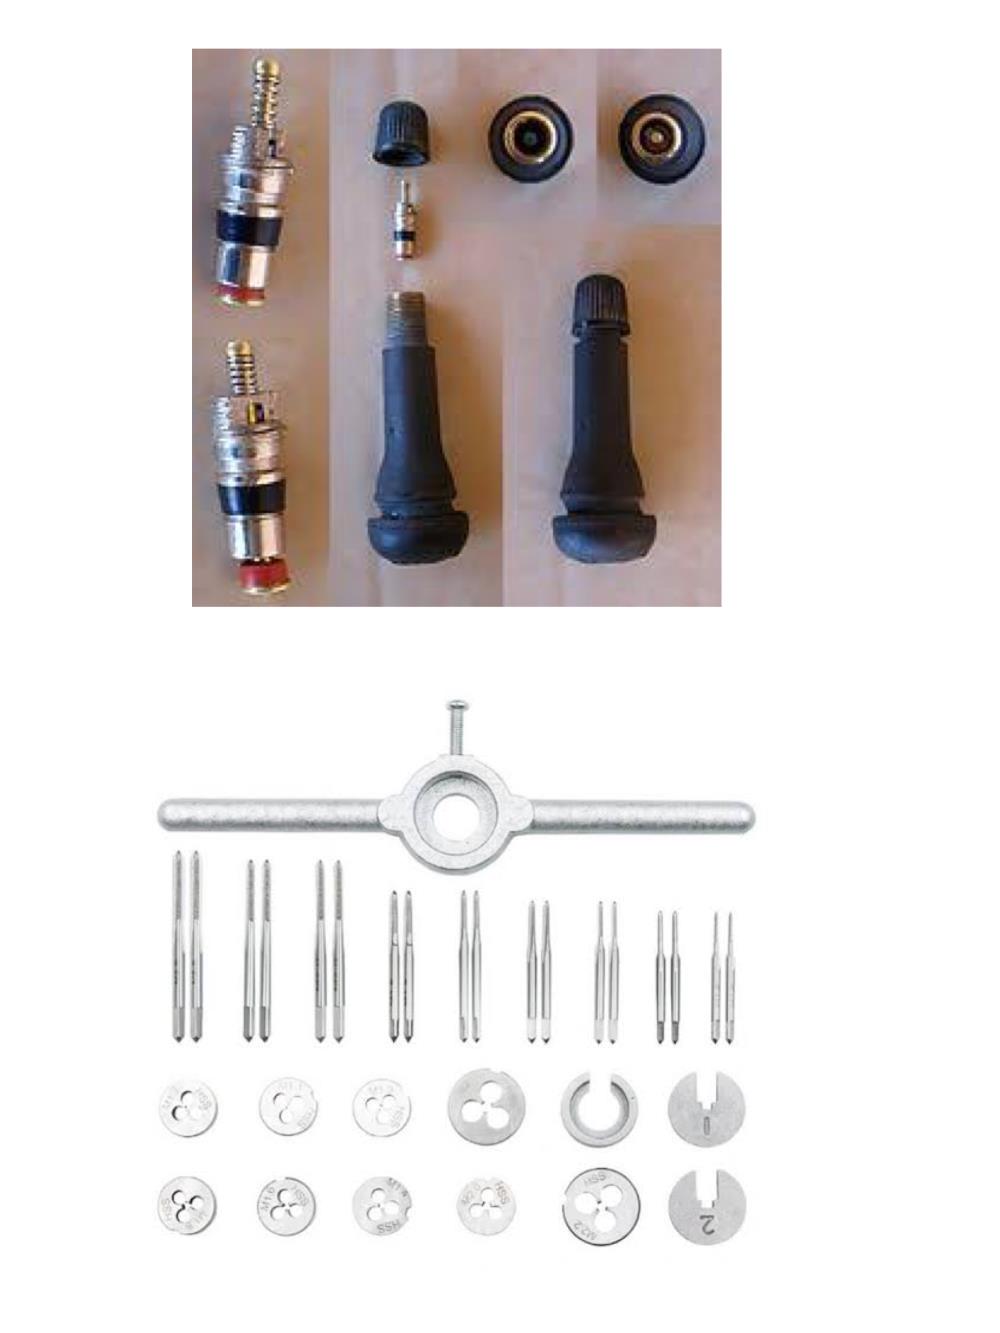 Valve Screw Bicycle Automobile thread,Valves for Vehicle Tyres,เกลียวจุกยาง,Valves for Vehicle Tyres,Pumps, Valves and Accessories/Valves/Fuel & Gas Valves